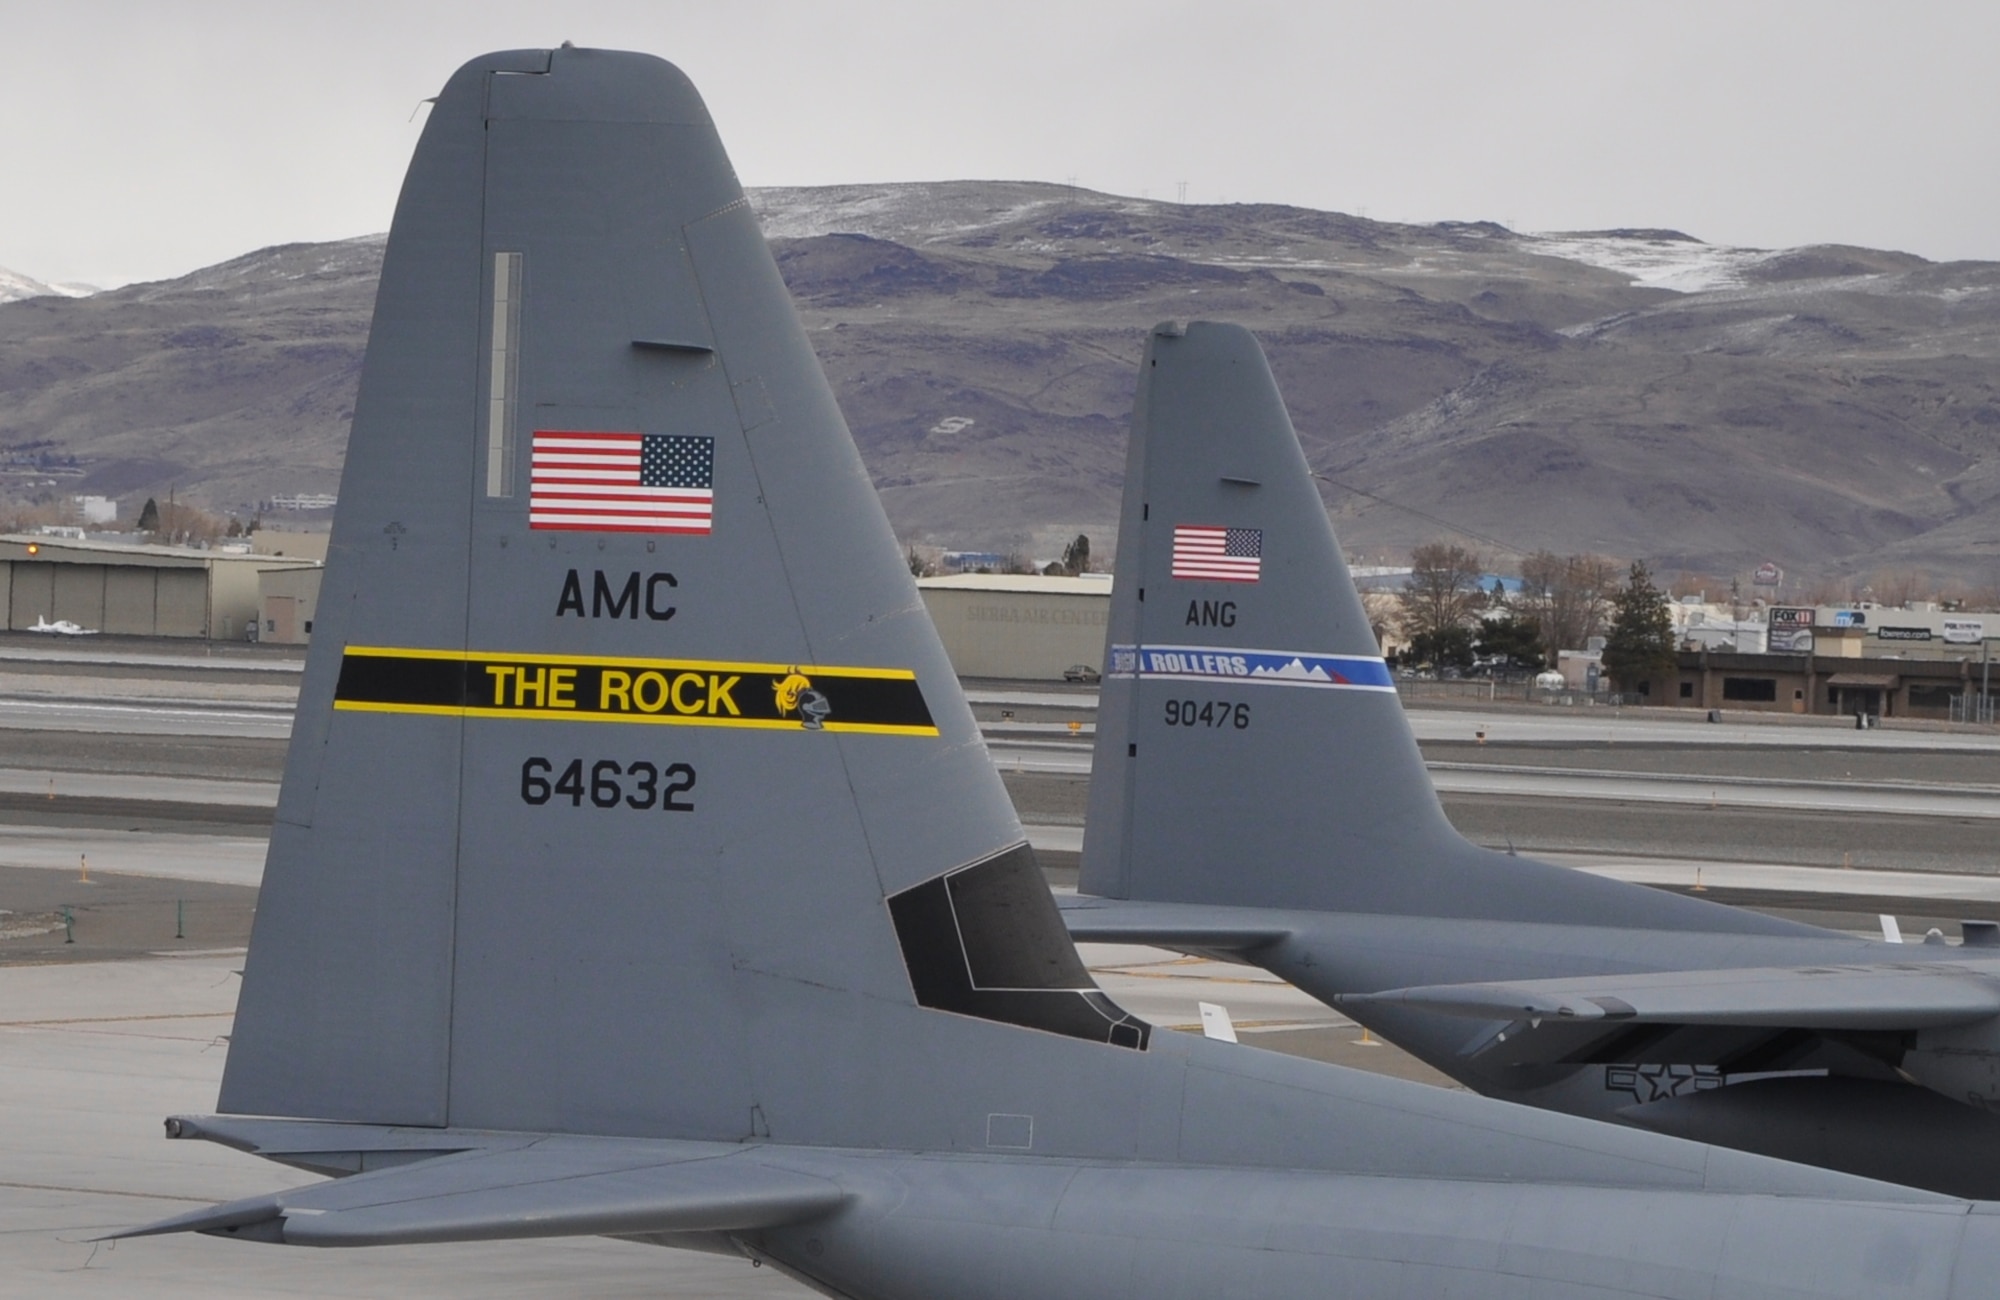 Tails of the 41st Airlift Squadron, Little Rock "The Rock" and 192nd Airlift Squadron "High Rollers" share the parking apron at the Nevada Air National Guard Base in Reno, Nev.  The 41st Airlift Squadron was in Reno to practice mountain flying and to conduct other training prior to deploying to Afghanistan (USAF photo by Capt. Jason Yuhasz released).
